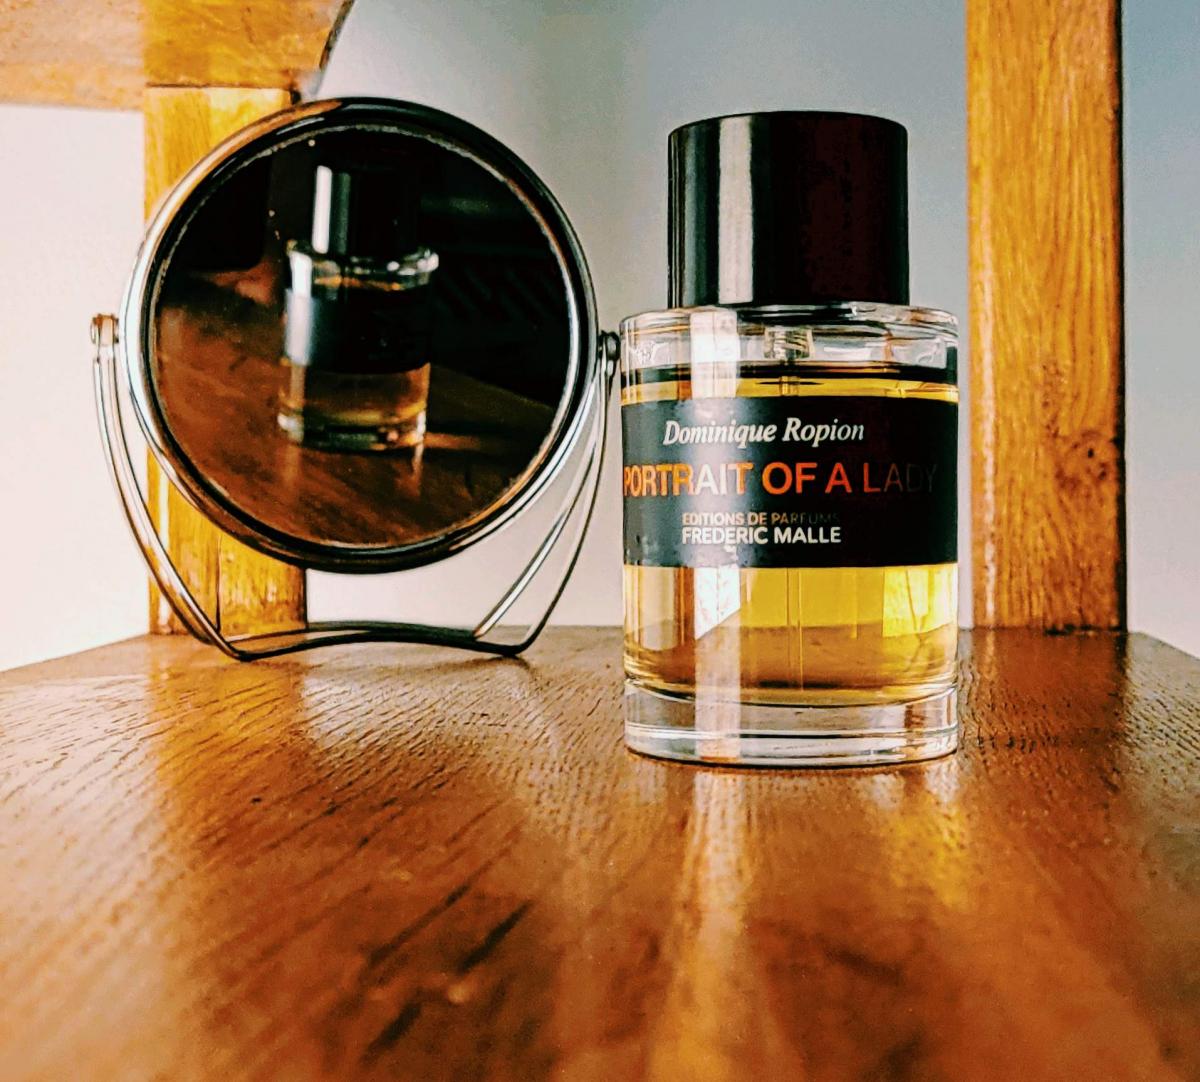 Portrait of a Lady Frederic Malle perfume - a fragrance for women 2010